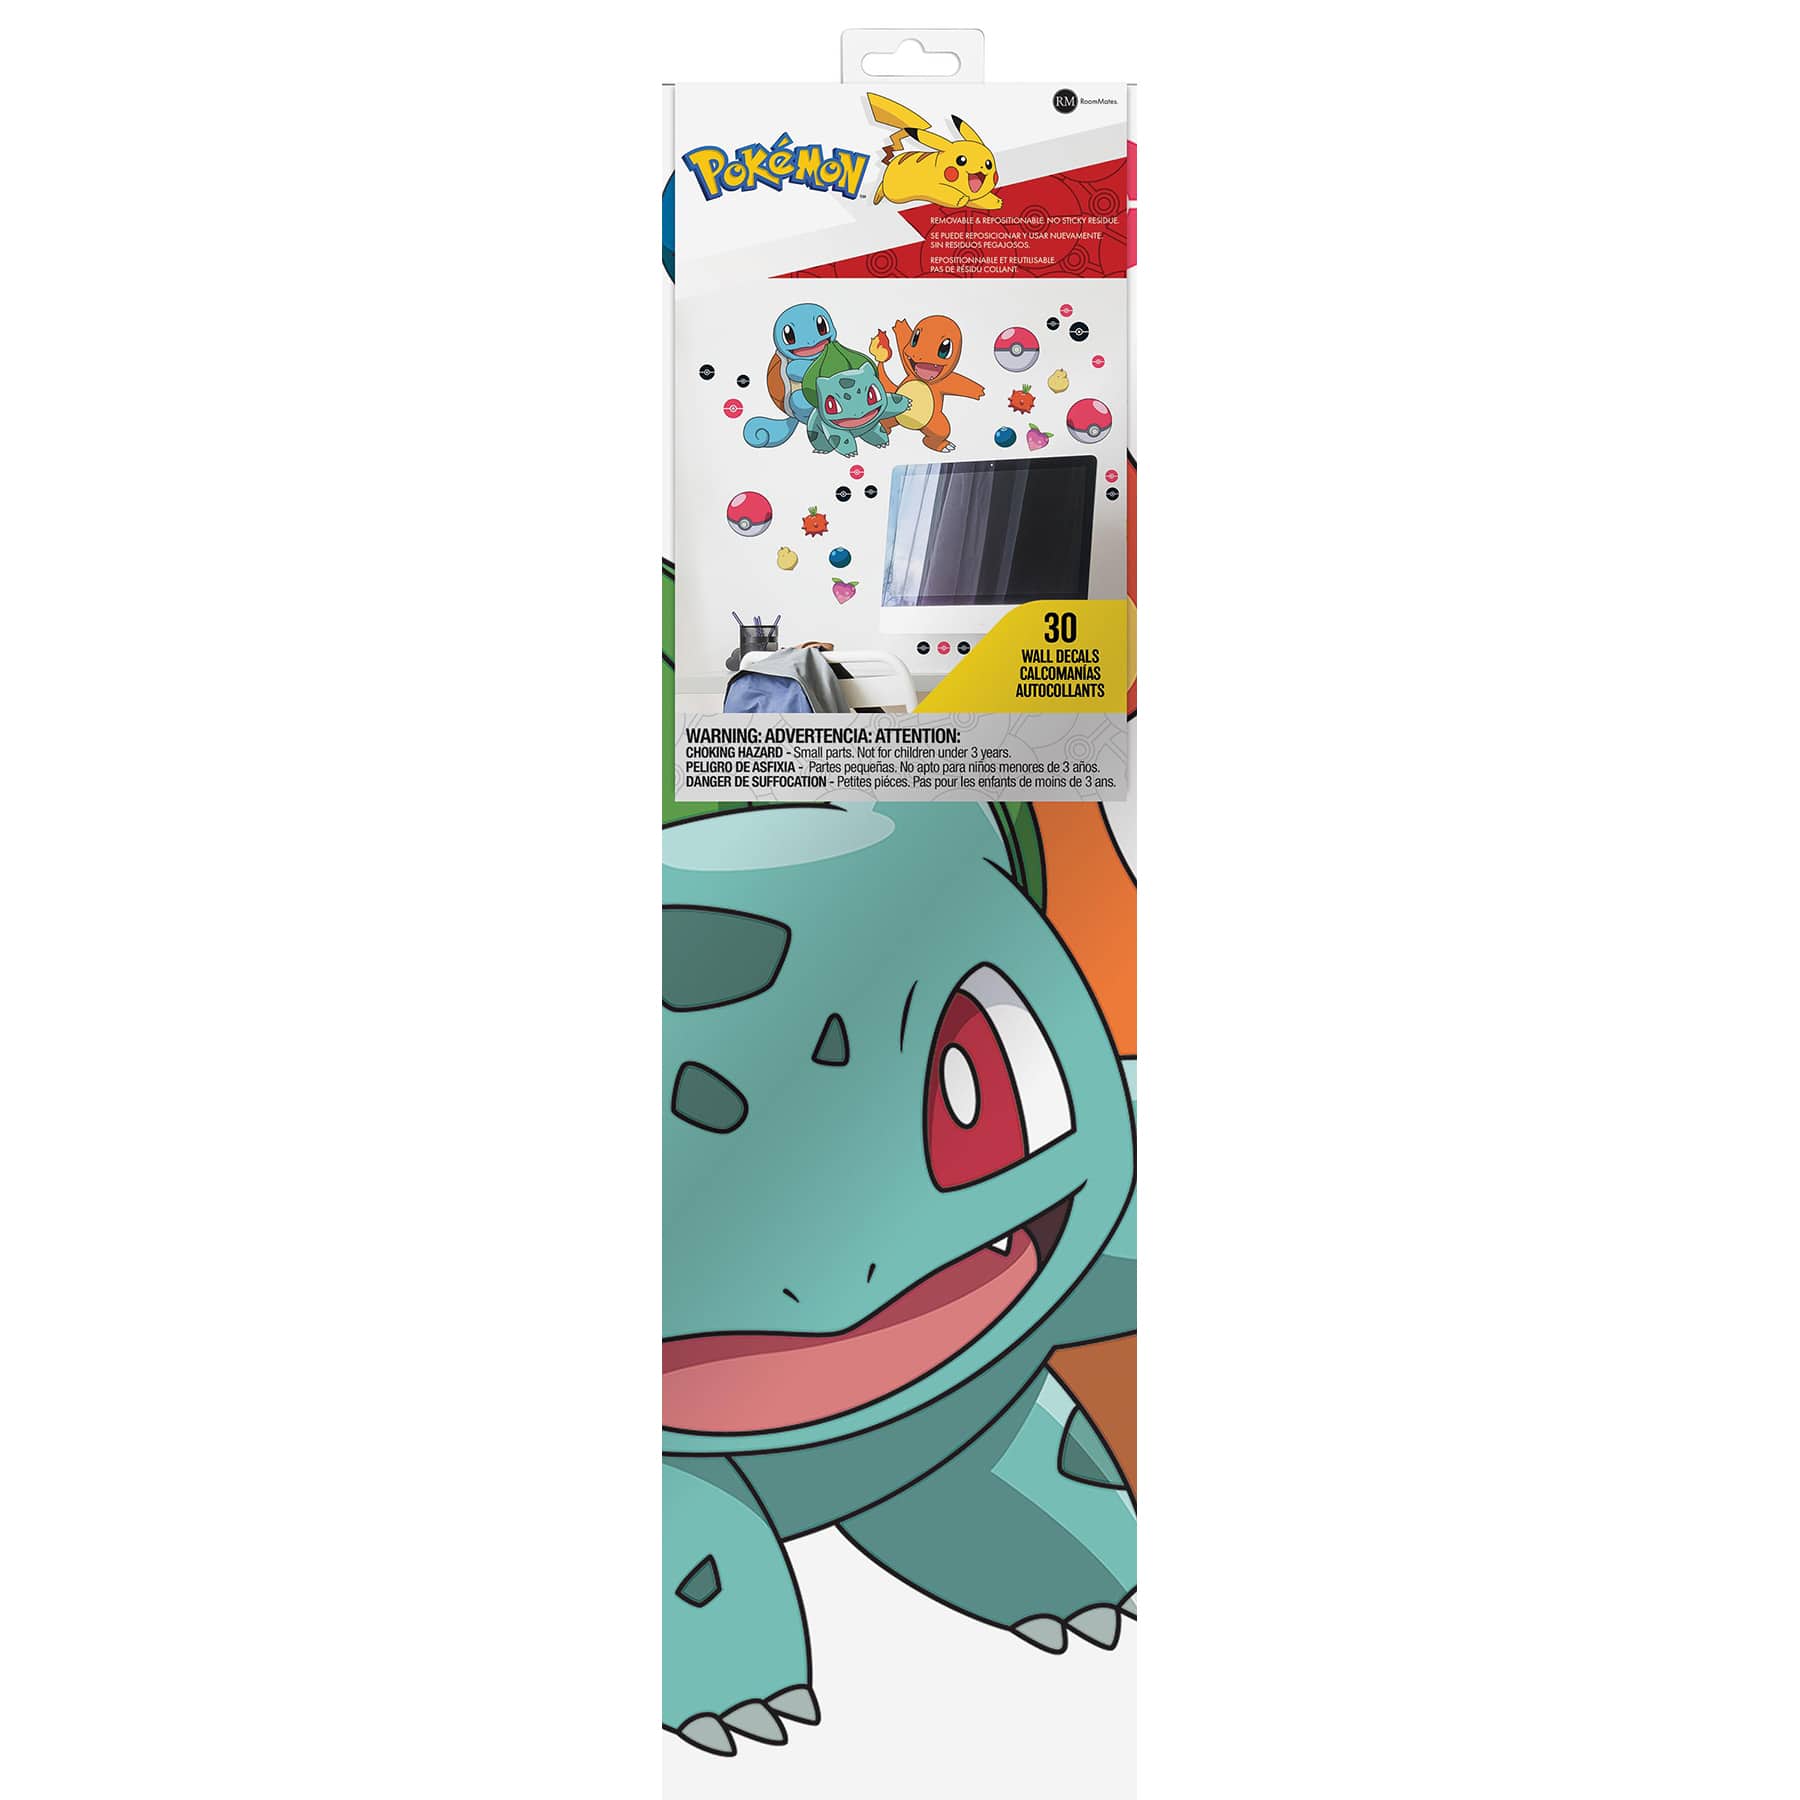 RoomMates Pokémon Squirtle, Charmander & Bulbasaur Peel & Stick Giant Wall  Decals